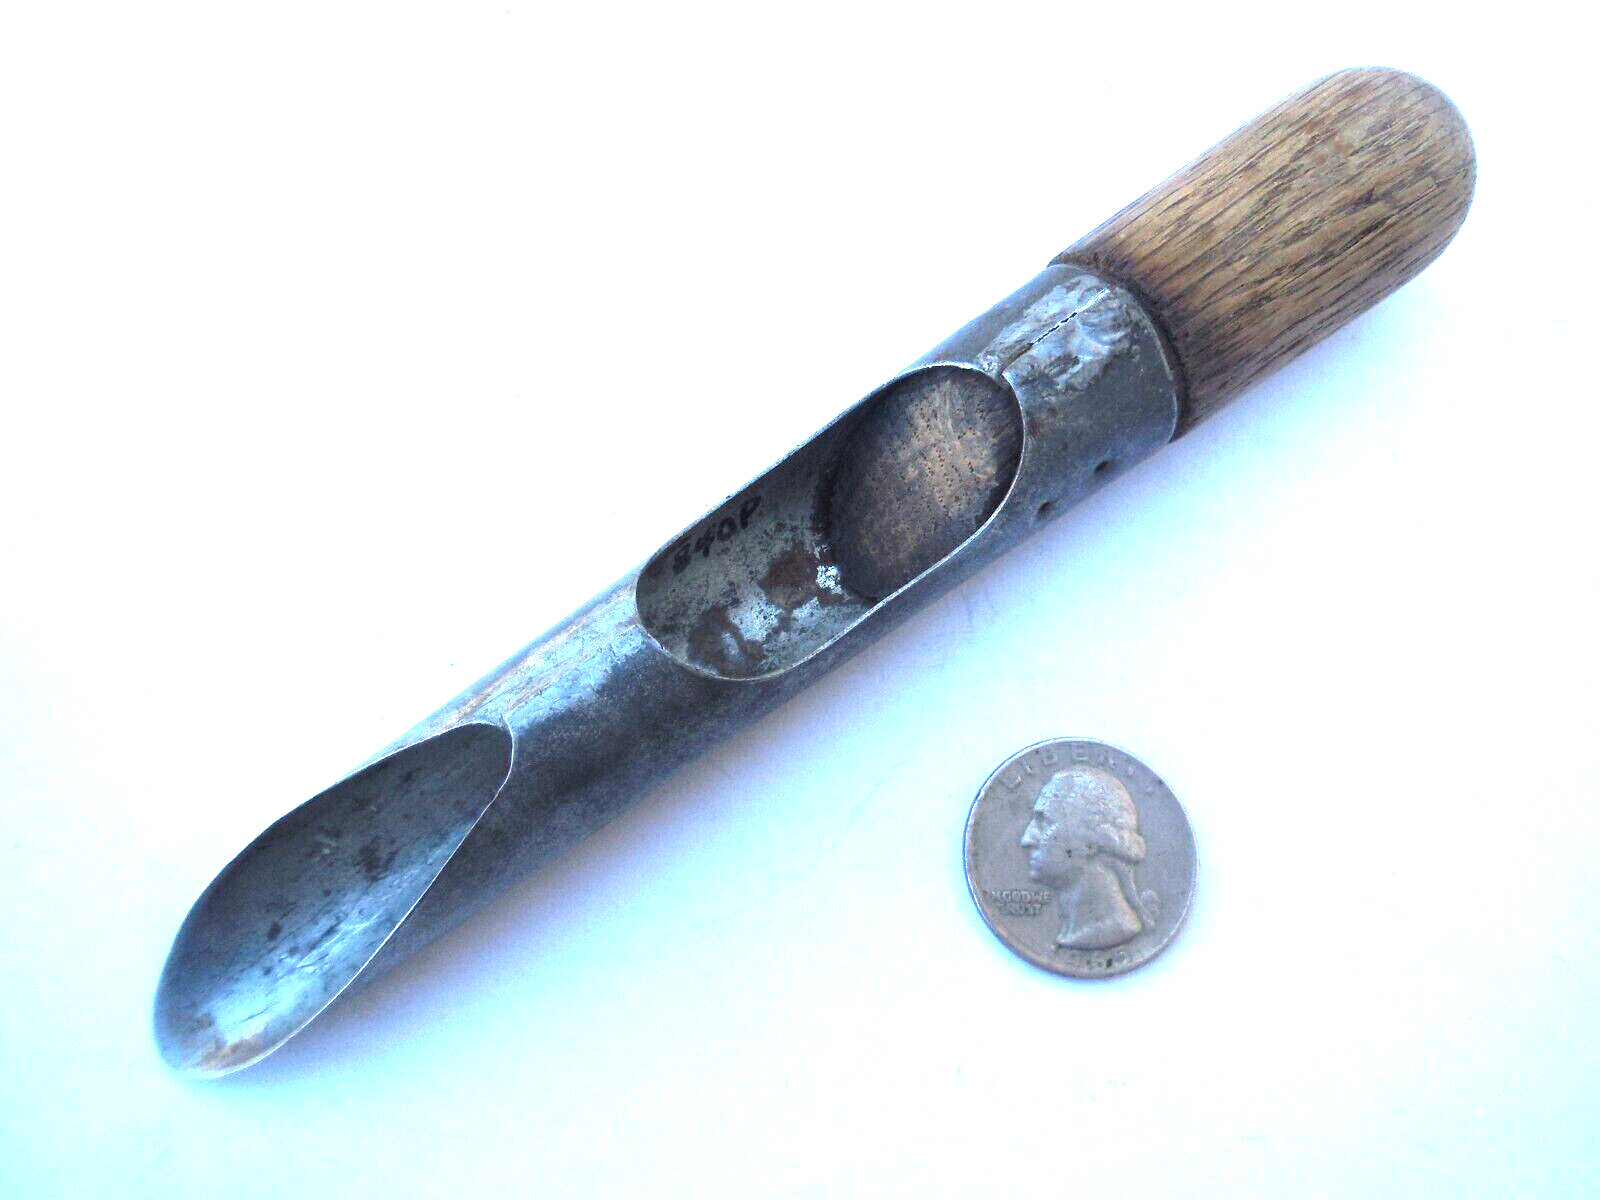 Tin apple corer with wood handle circa later 1800's